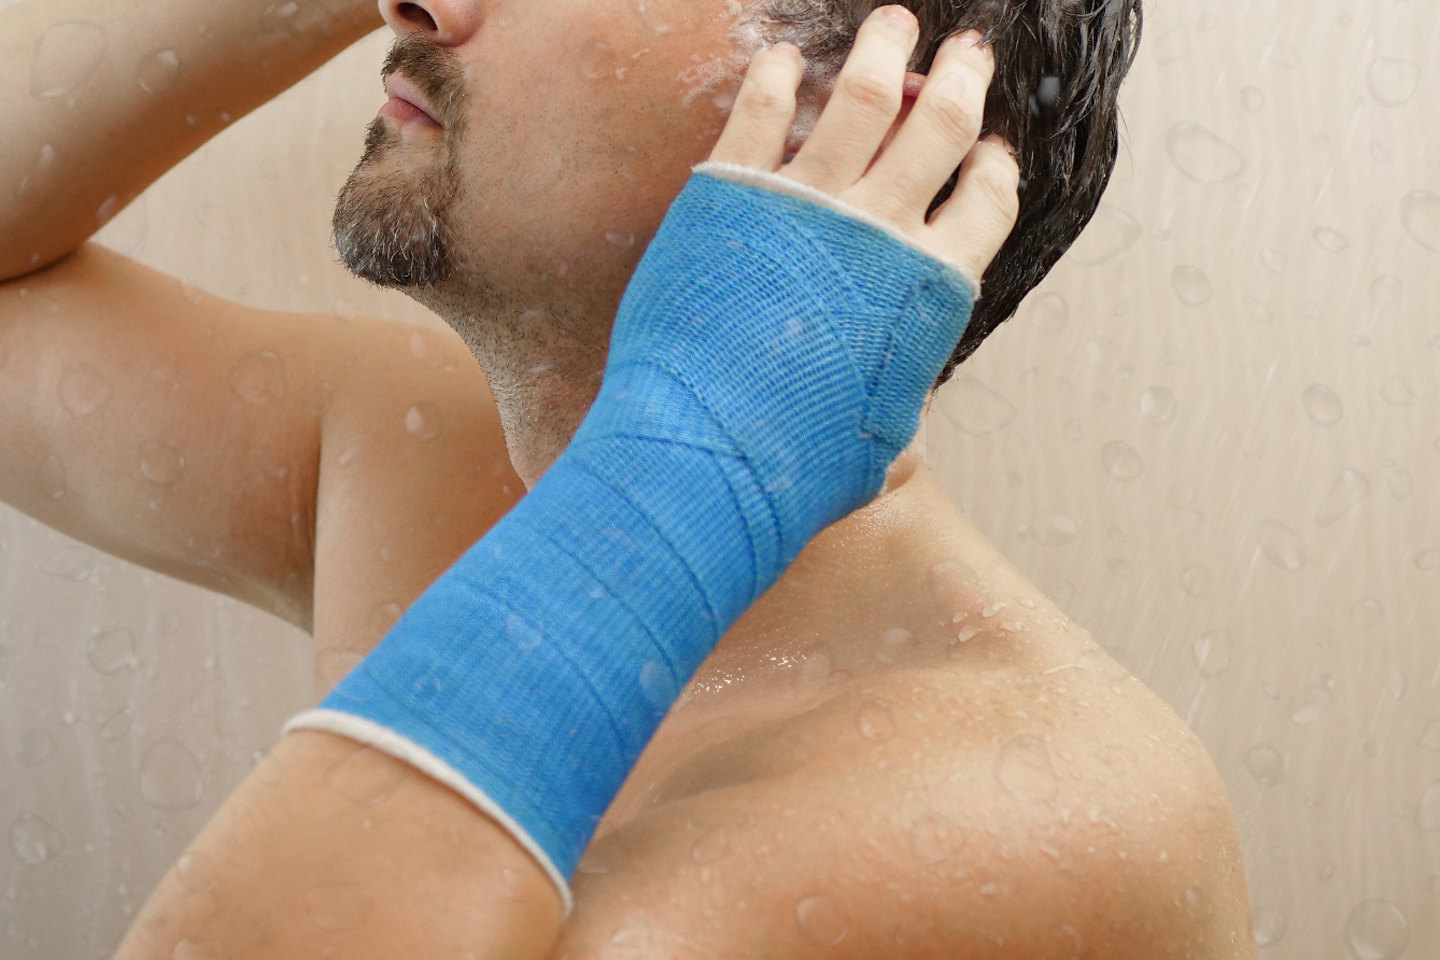 Waterproof Casts and Cast Covers for Bathing or Swimming